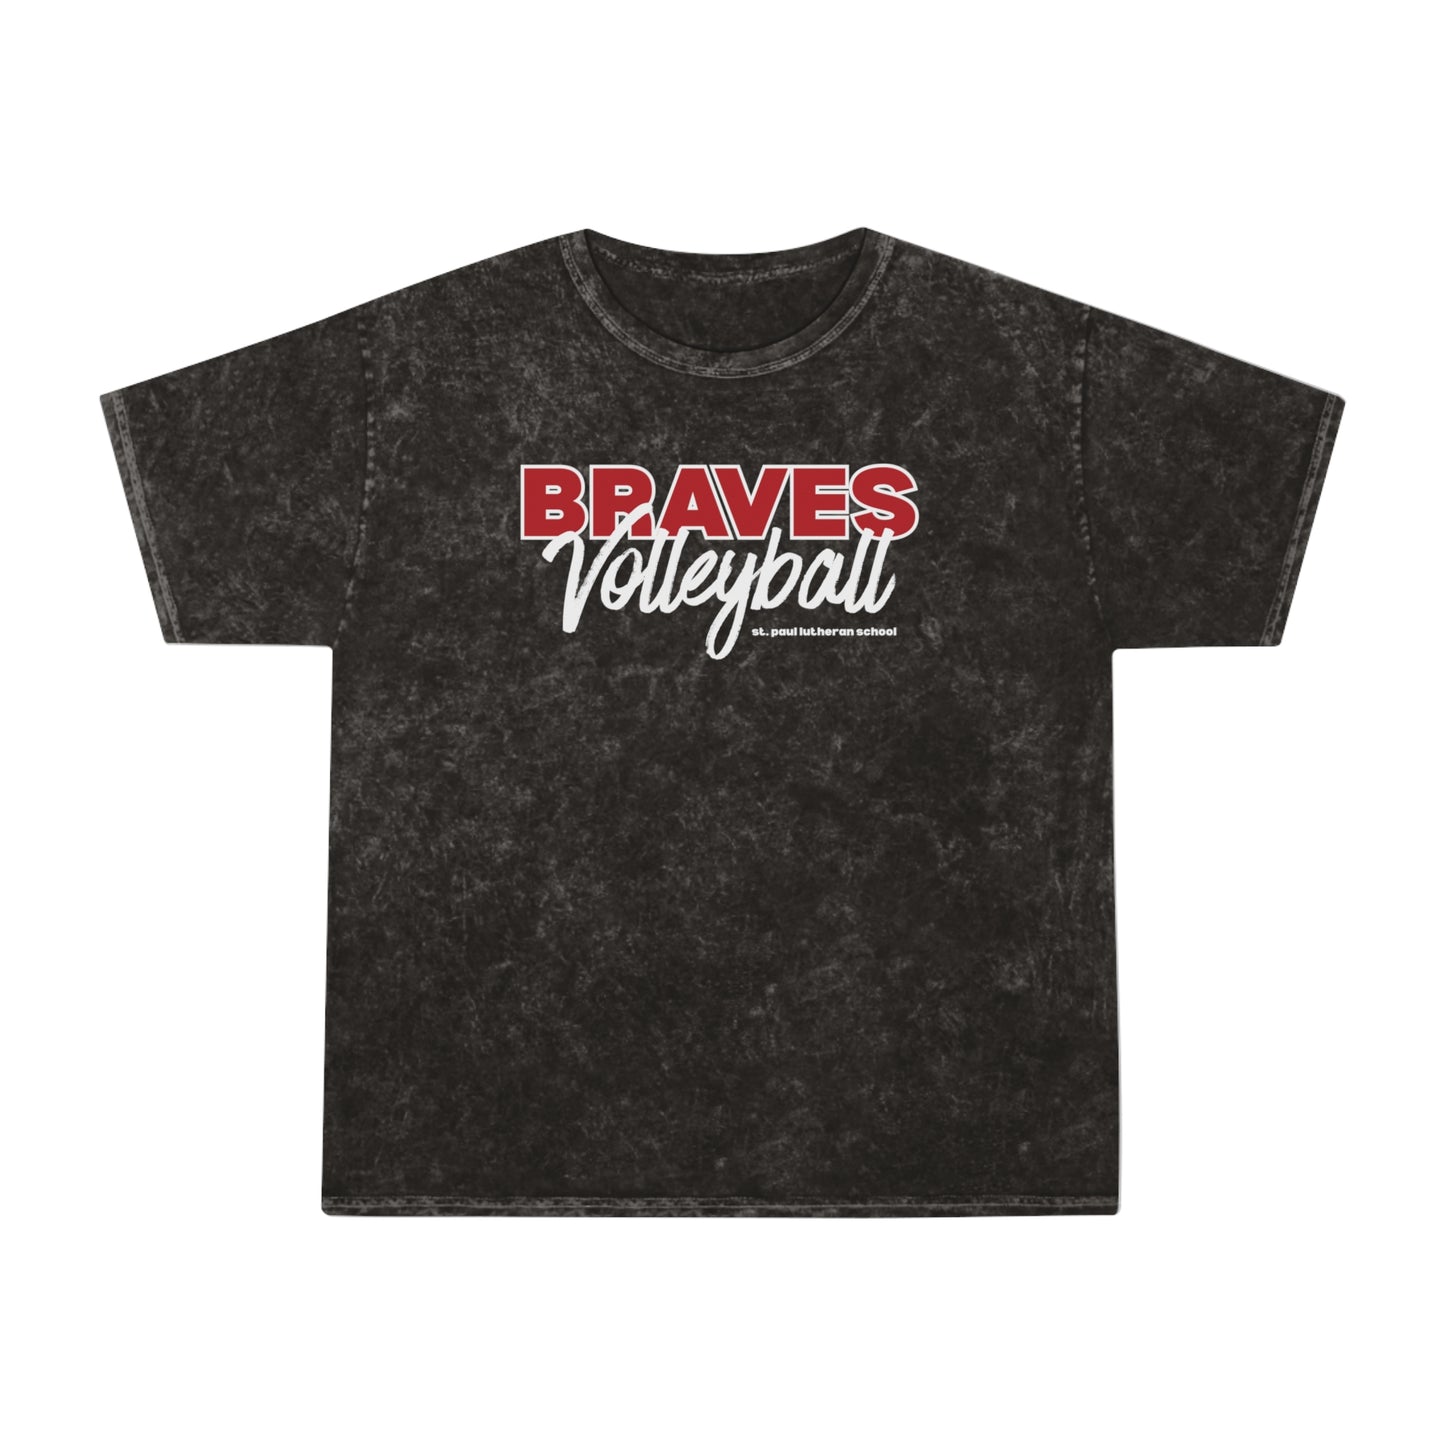 "BRAVES Volleyball" | Adult Unisex Mineral Wash T-Shirt | 2 Colors